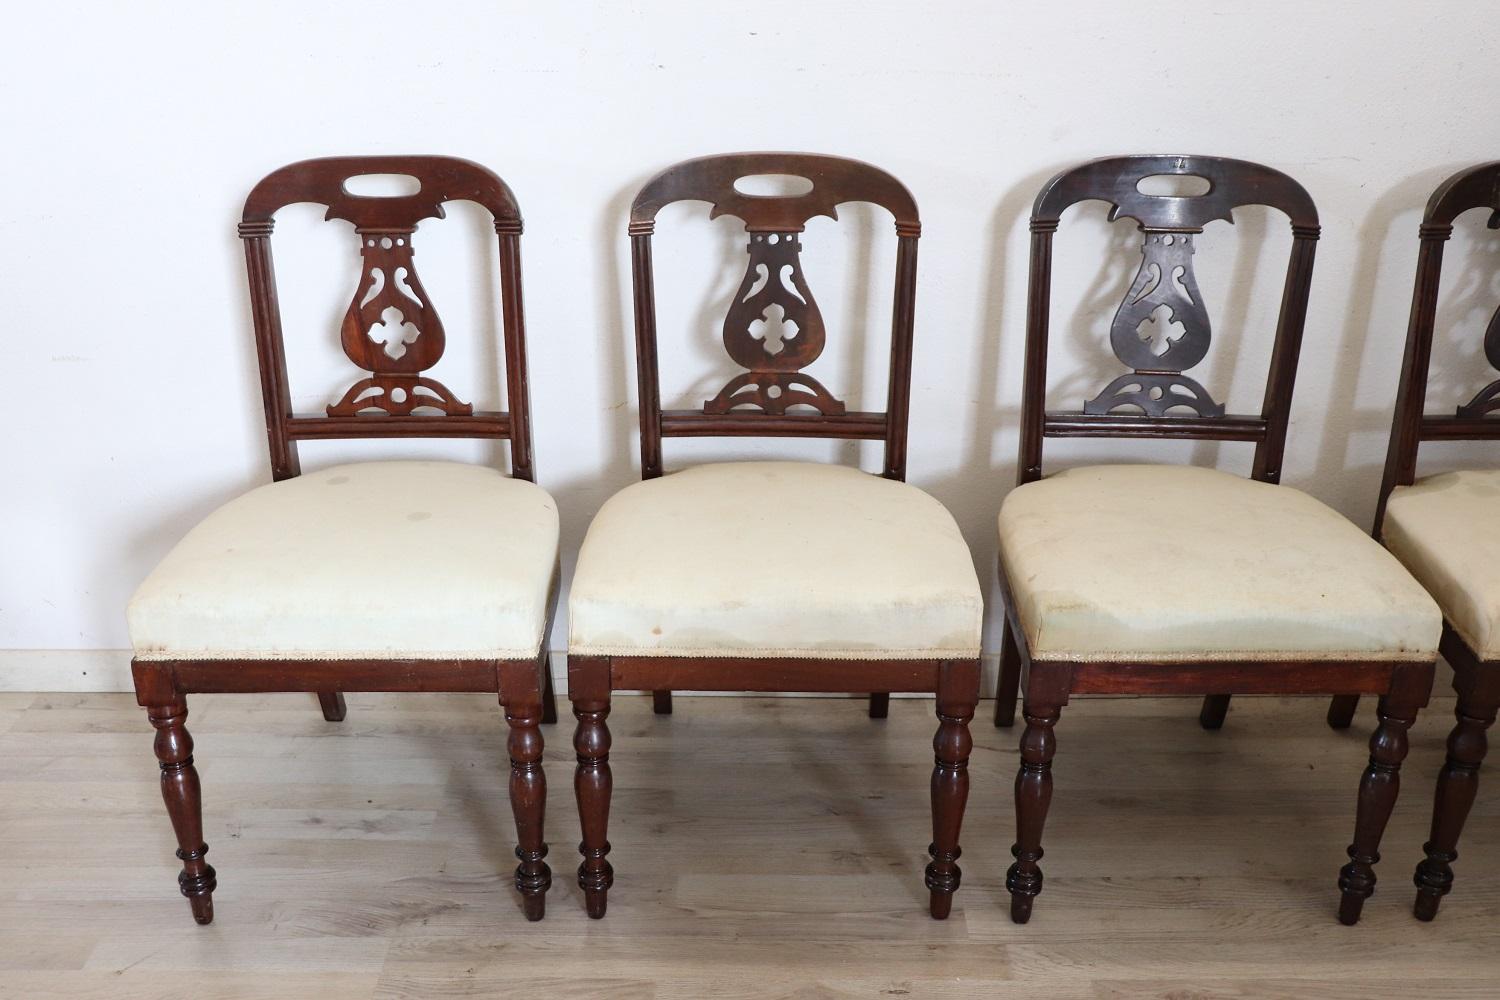 Series of refined 19th century anique English mahogany wood six chairs. The legs are very elegant with turned wood decorations. The backrest has an elaborate wood carving decoration. The seat is wide and comfortable. Wood in antique goods